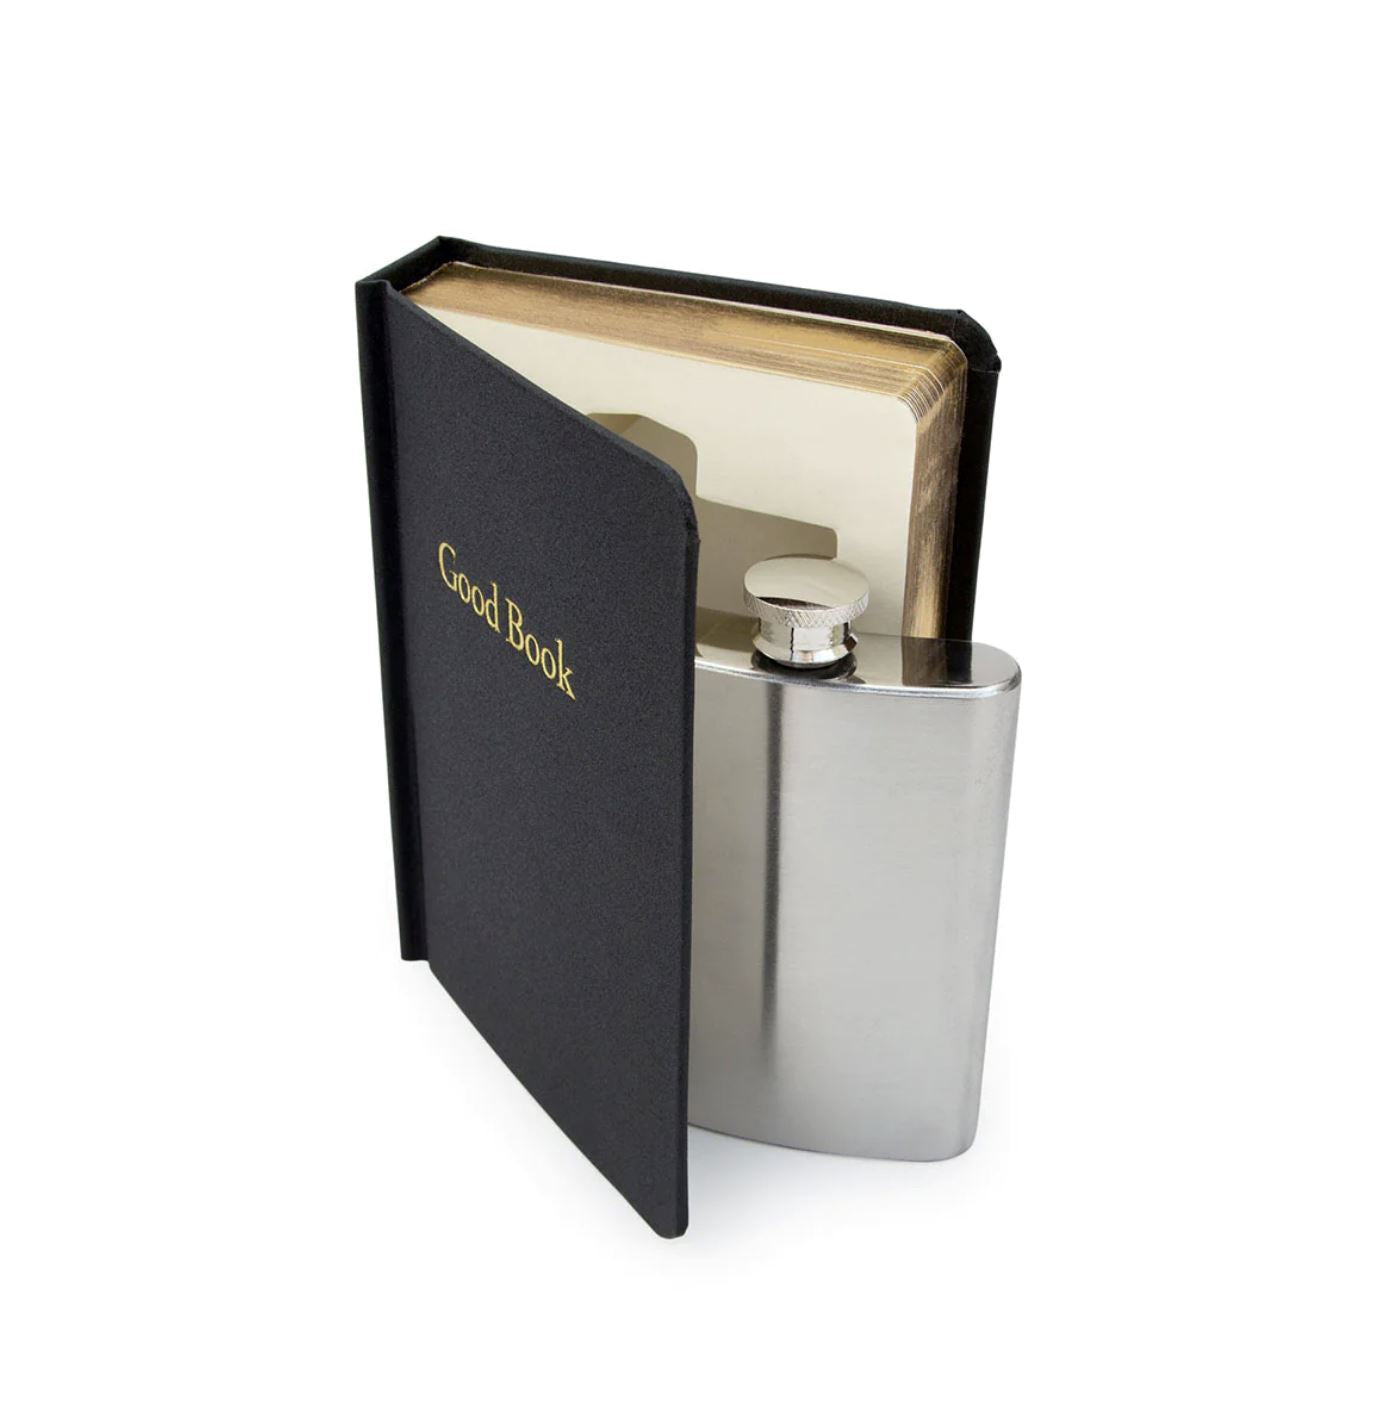 Flask in a Good Book - Third Drawer Down